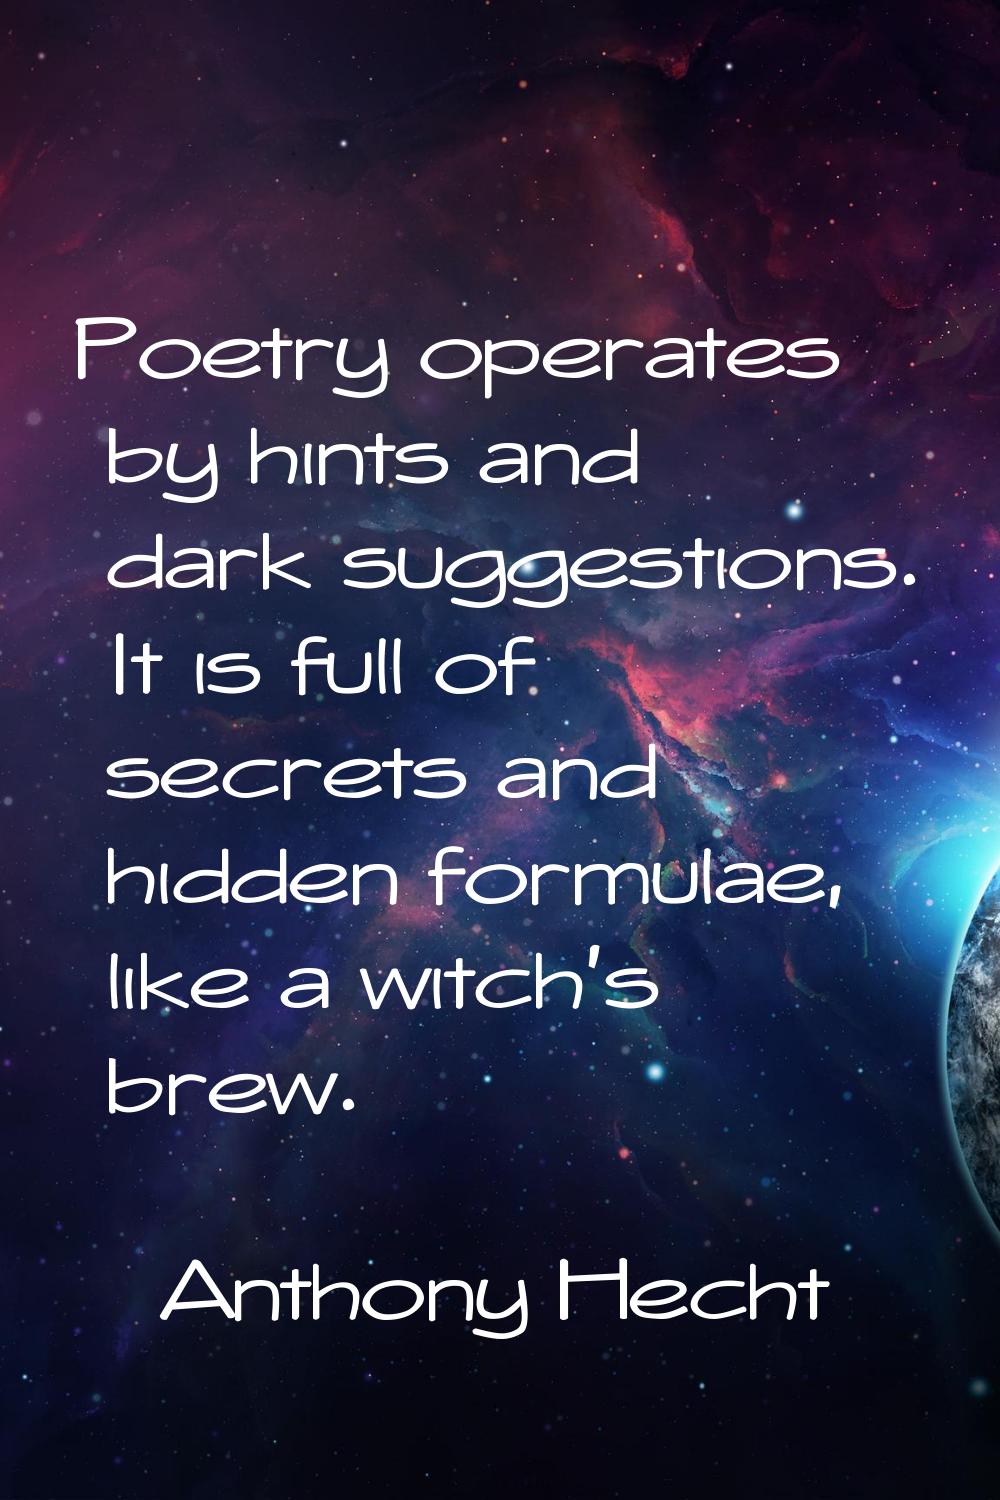 Poetry operates by hints and dark suggestions. It is full of secrets and hidden formulae, like a wi